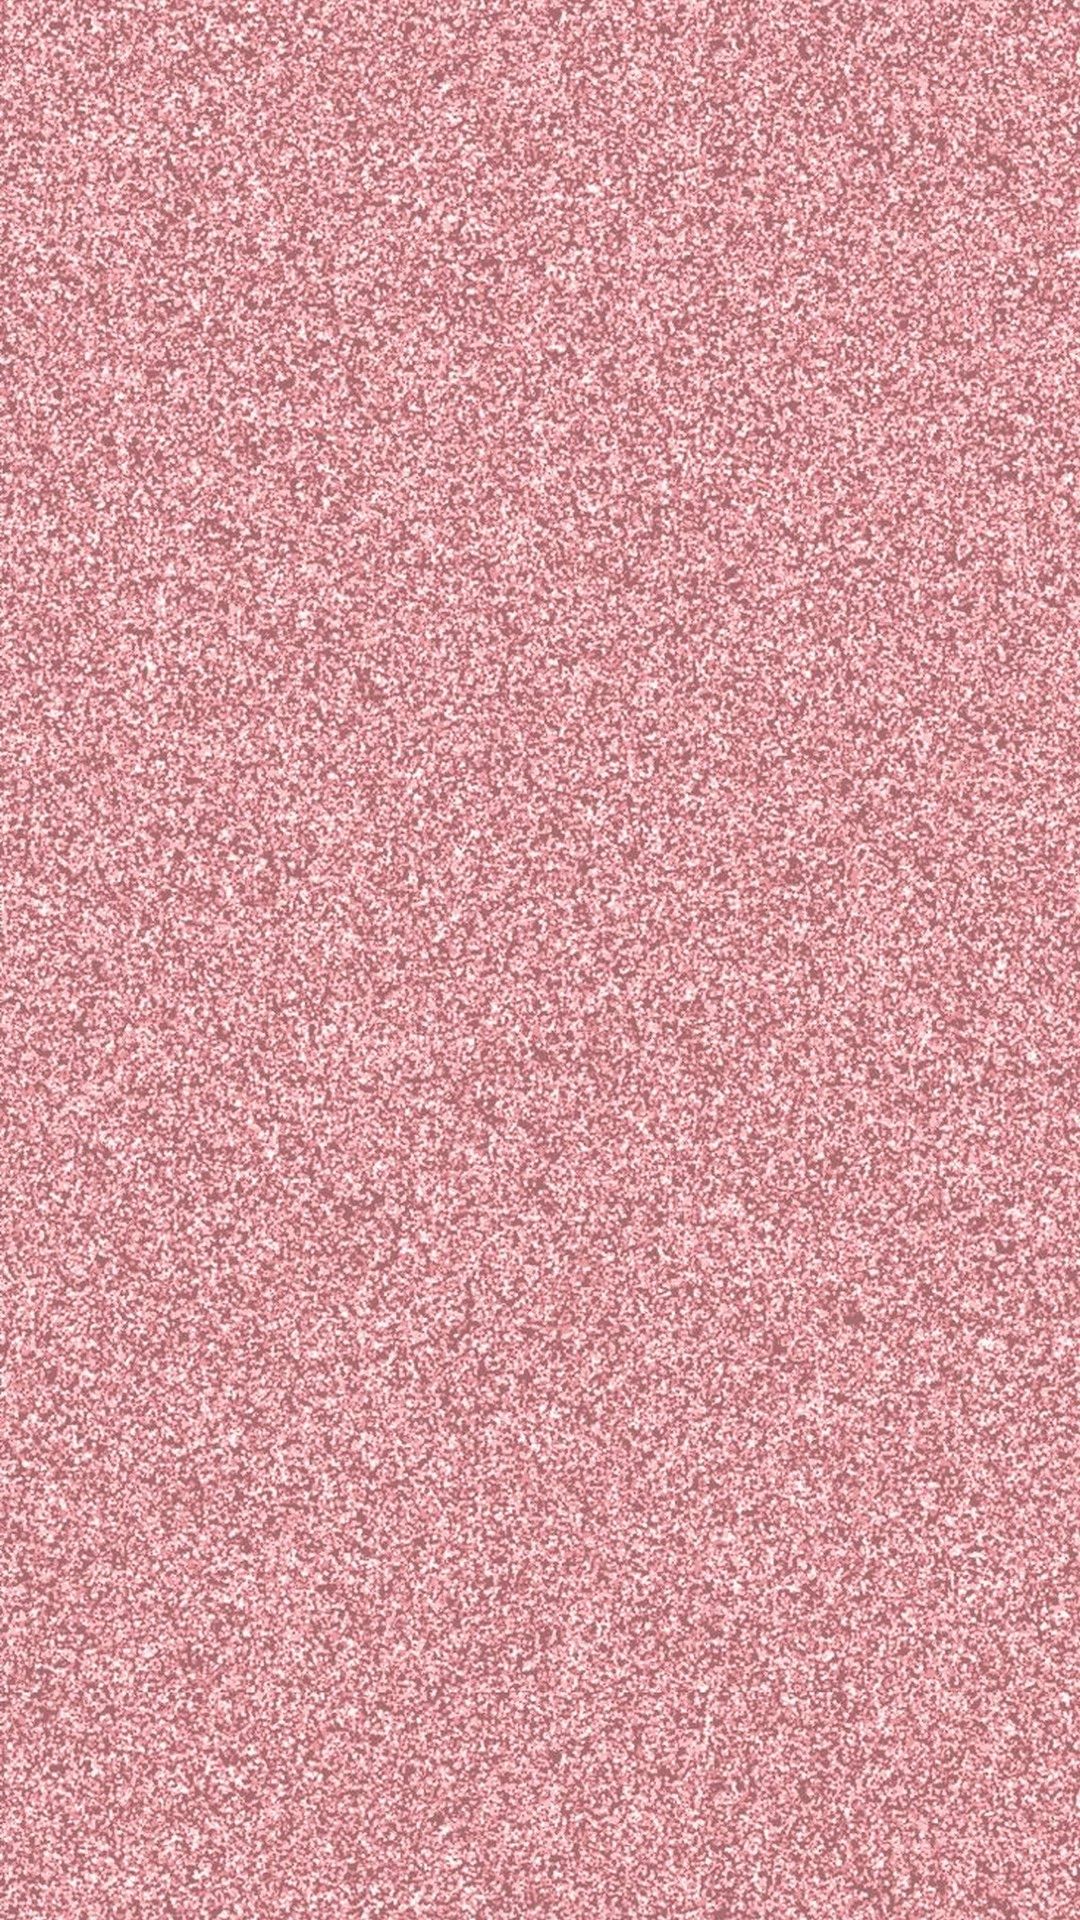 Pink Glitter Iphone Wallpapers